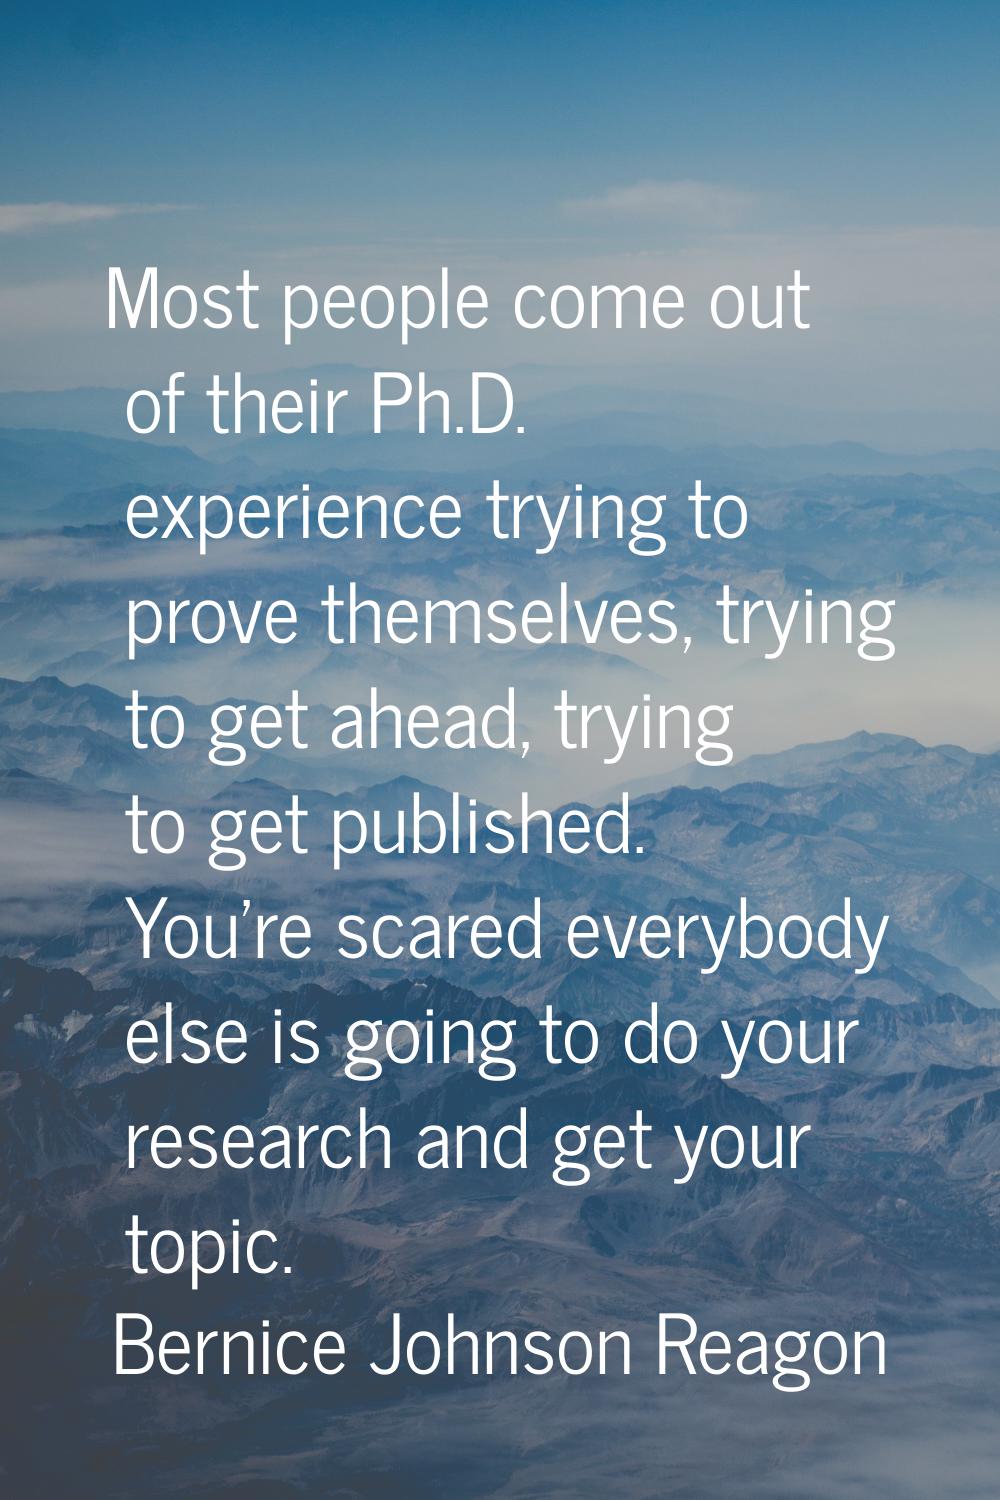 Most people come out of their Ph.D. experience trying to prove themselves, trying to get ahead, try